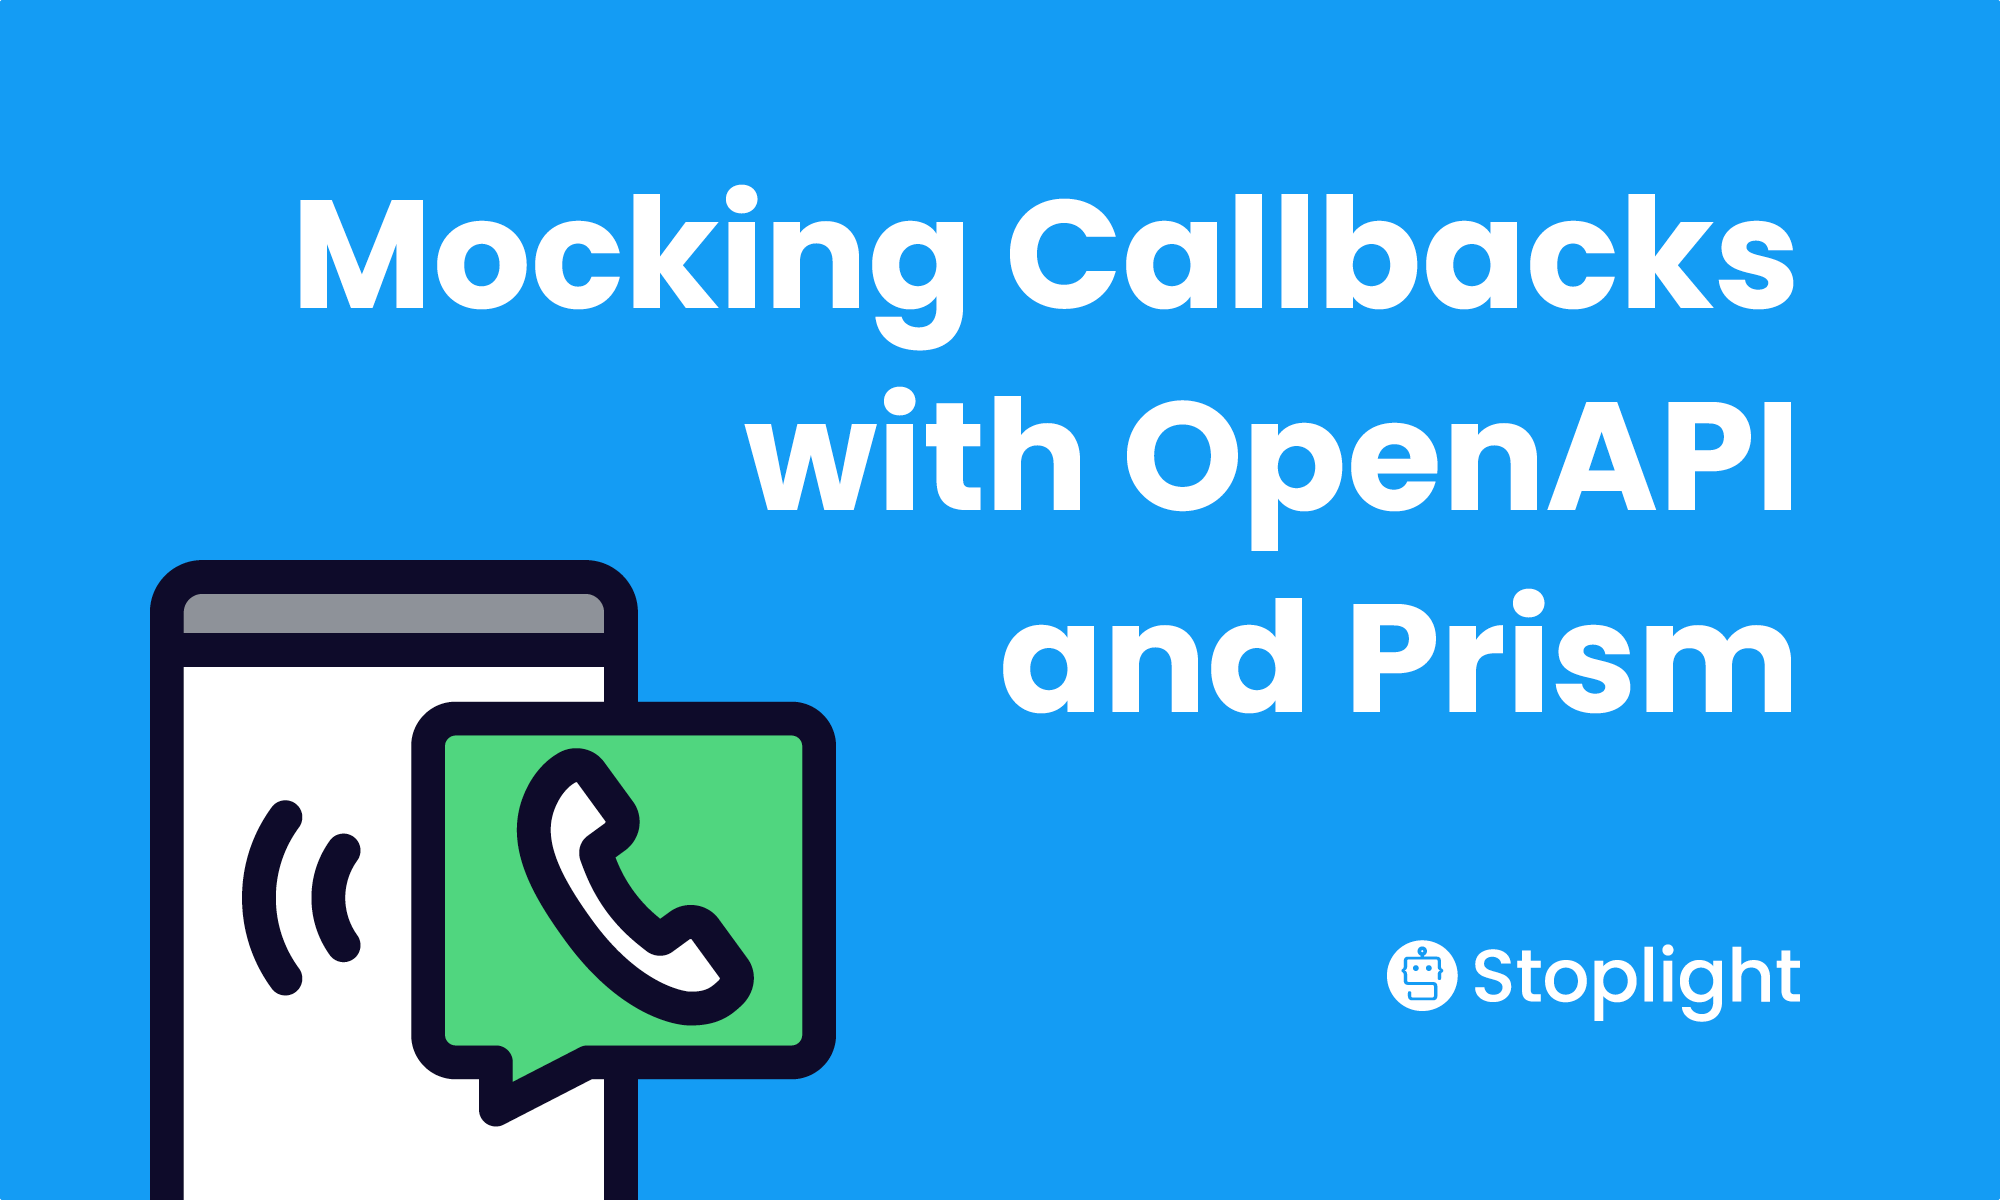 Mocking Callbacks with OpenAPI and Prism